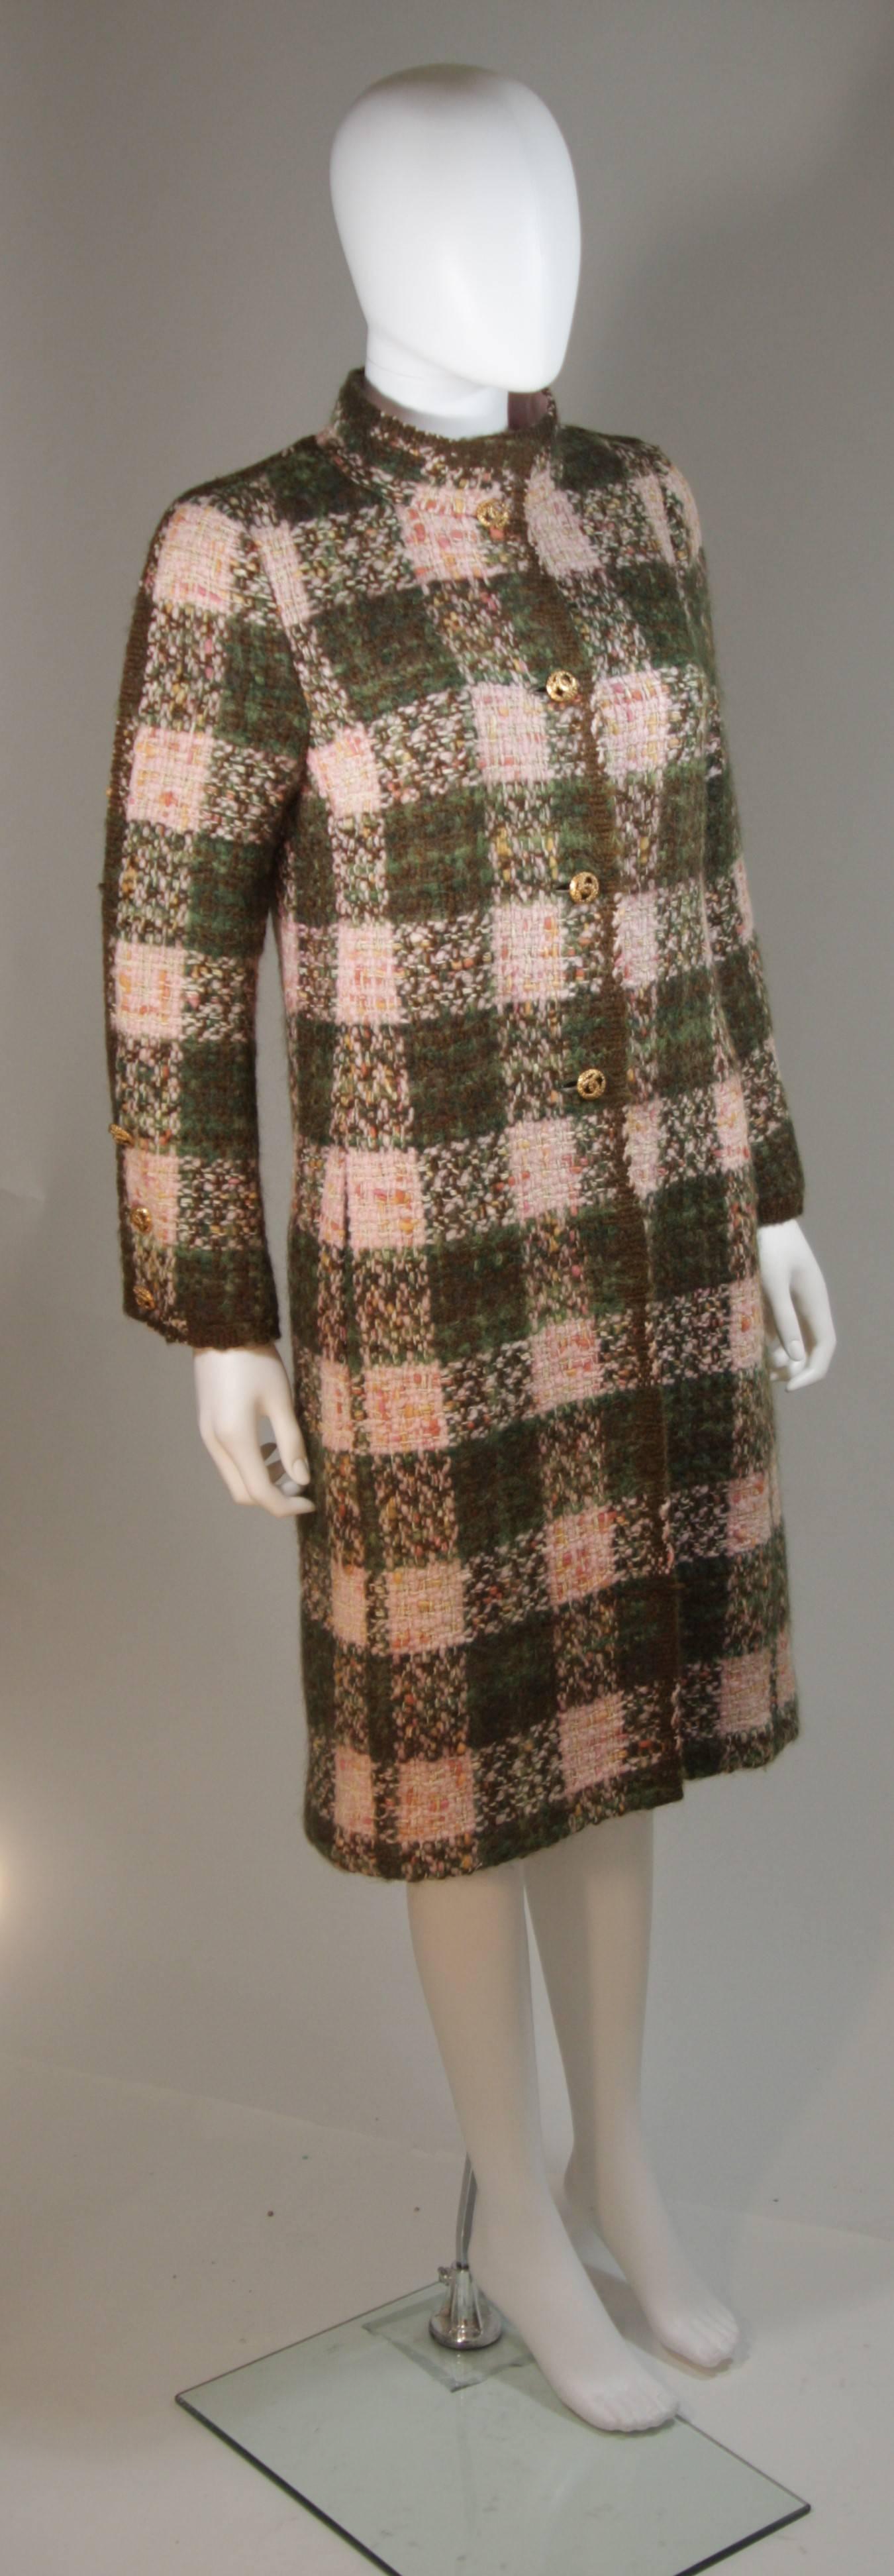 Women's CHANEL Haute Couture Circa 1960s Green and Pink Boucle Coat Size Small